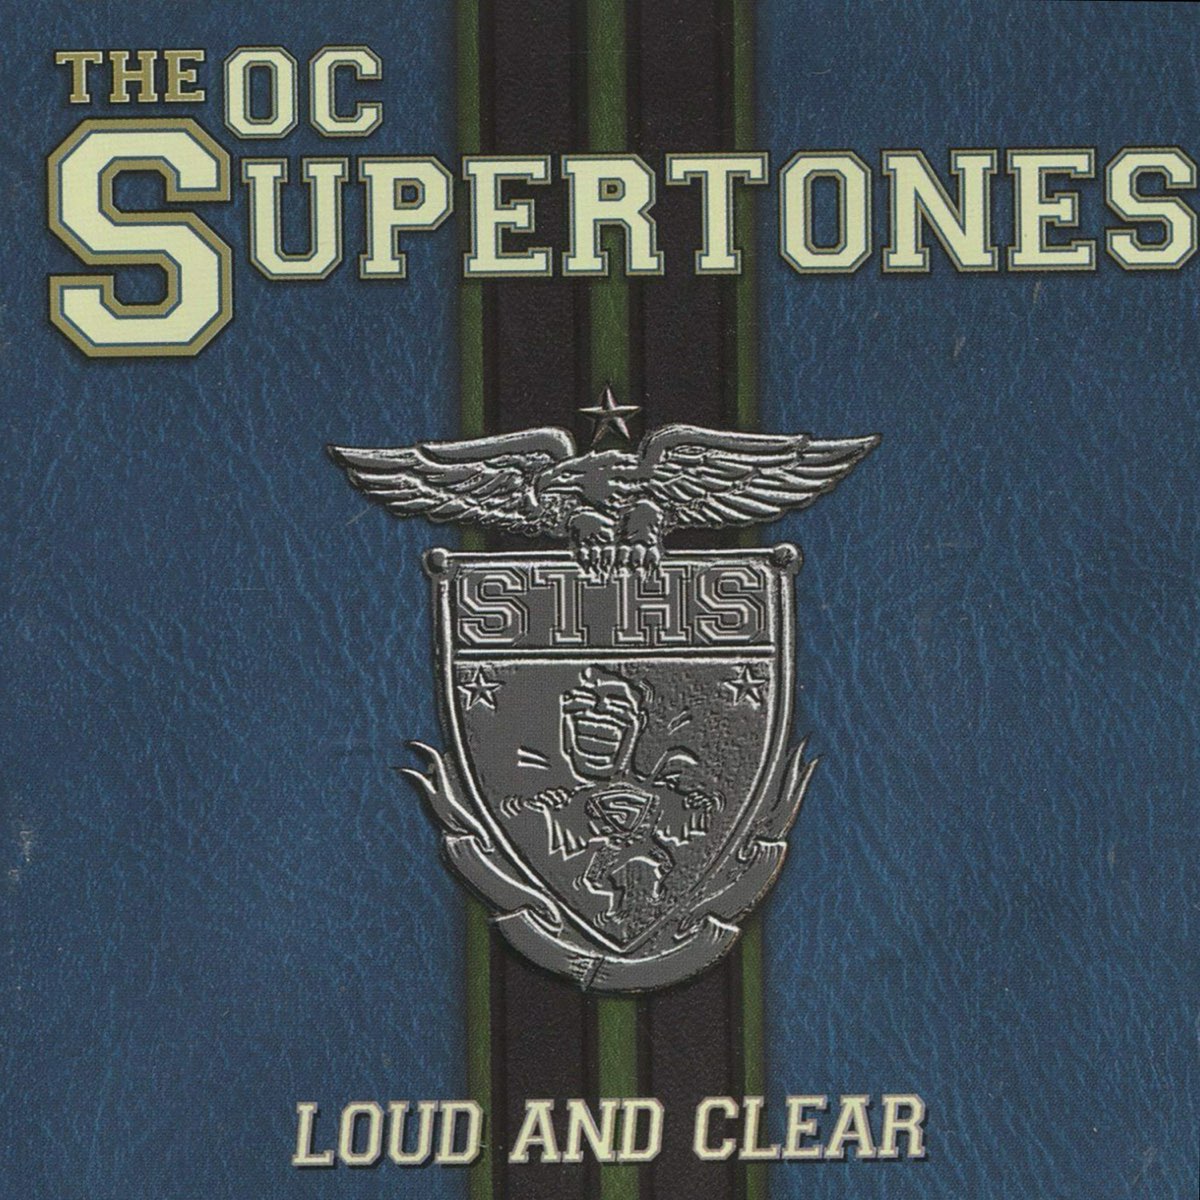 The Supertones. Supertone Clear. Loud and clear